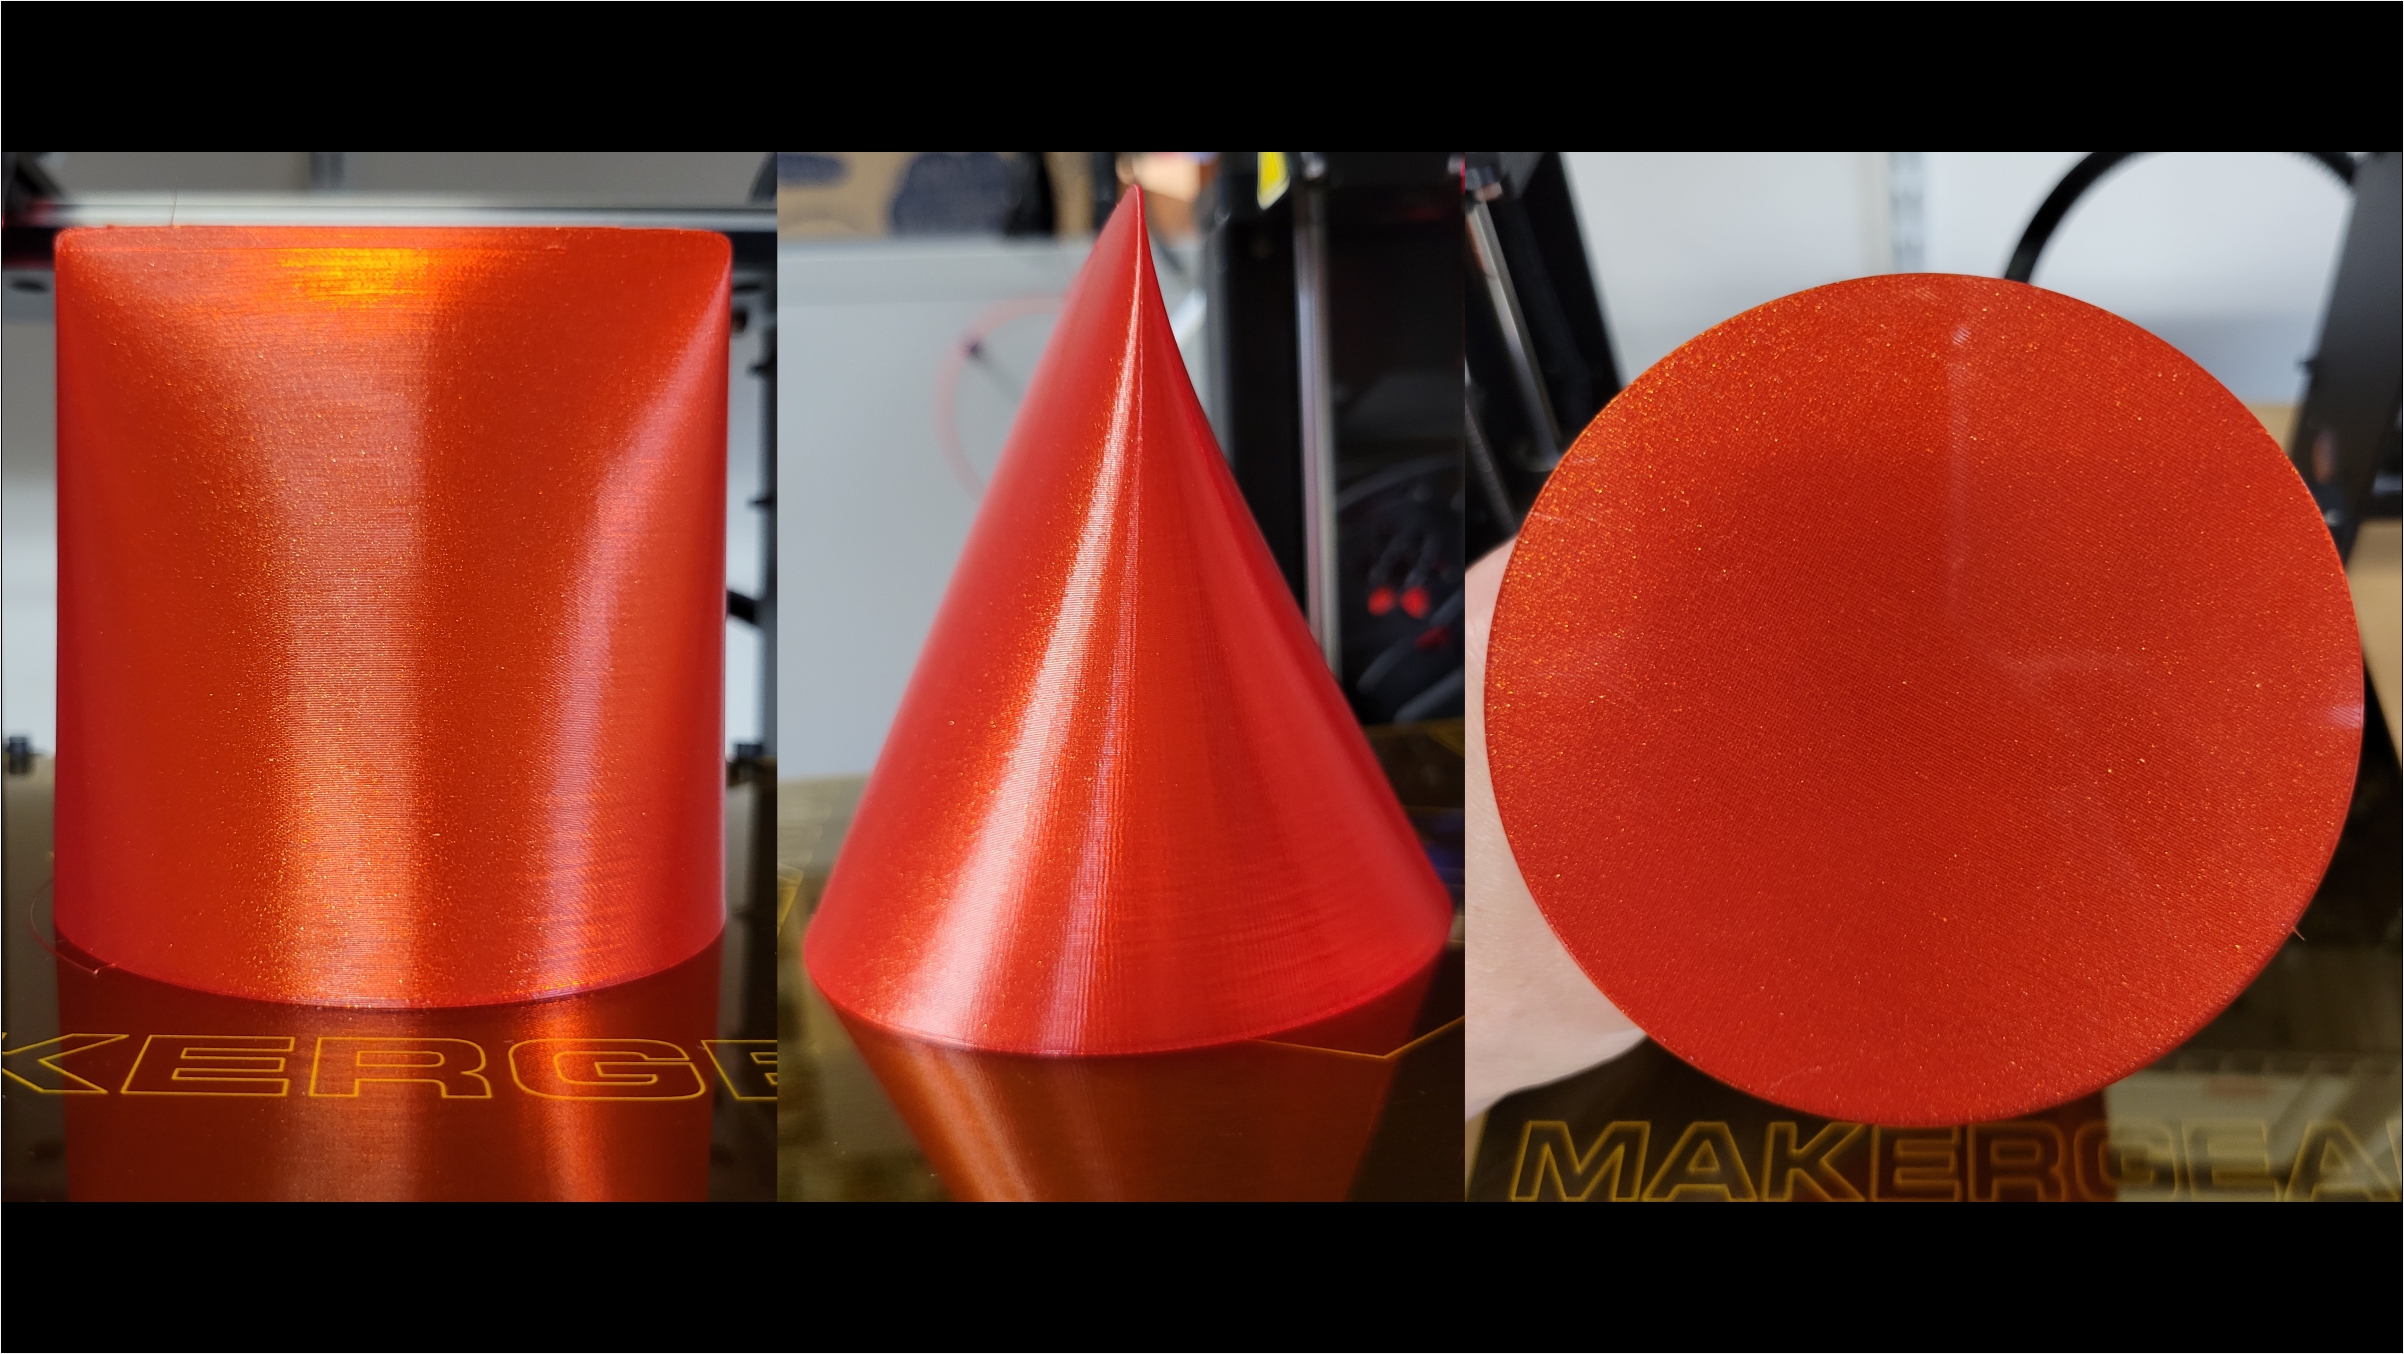 Three views of 3D printed Sqriancle.